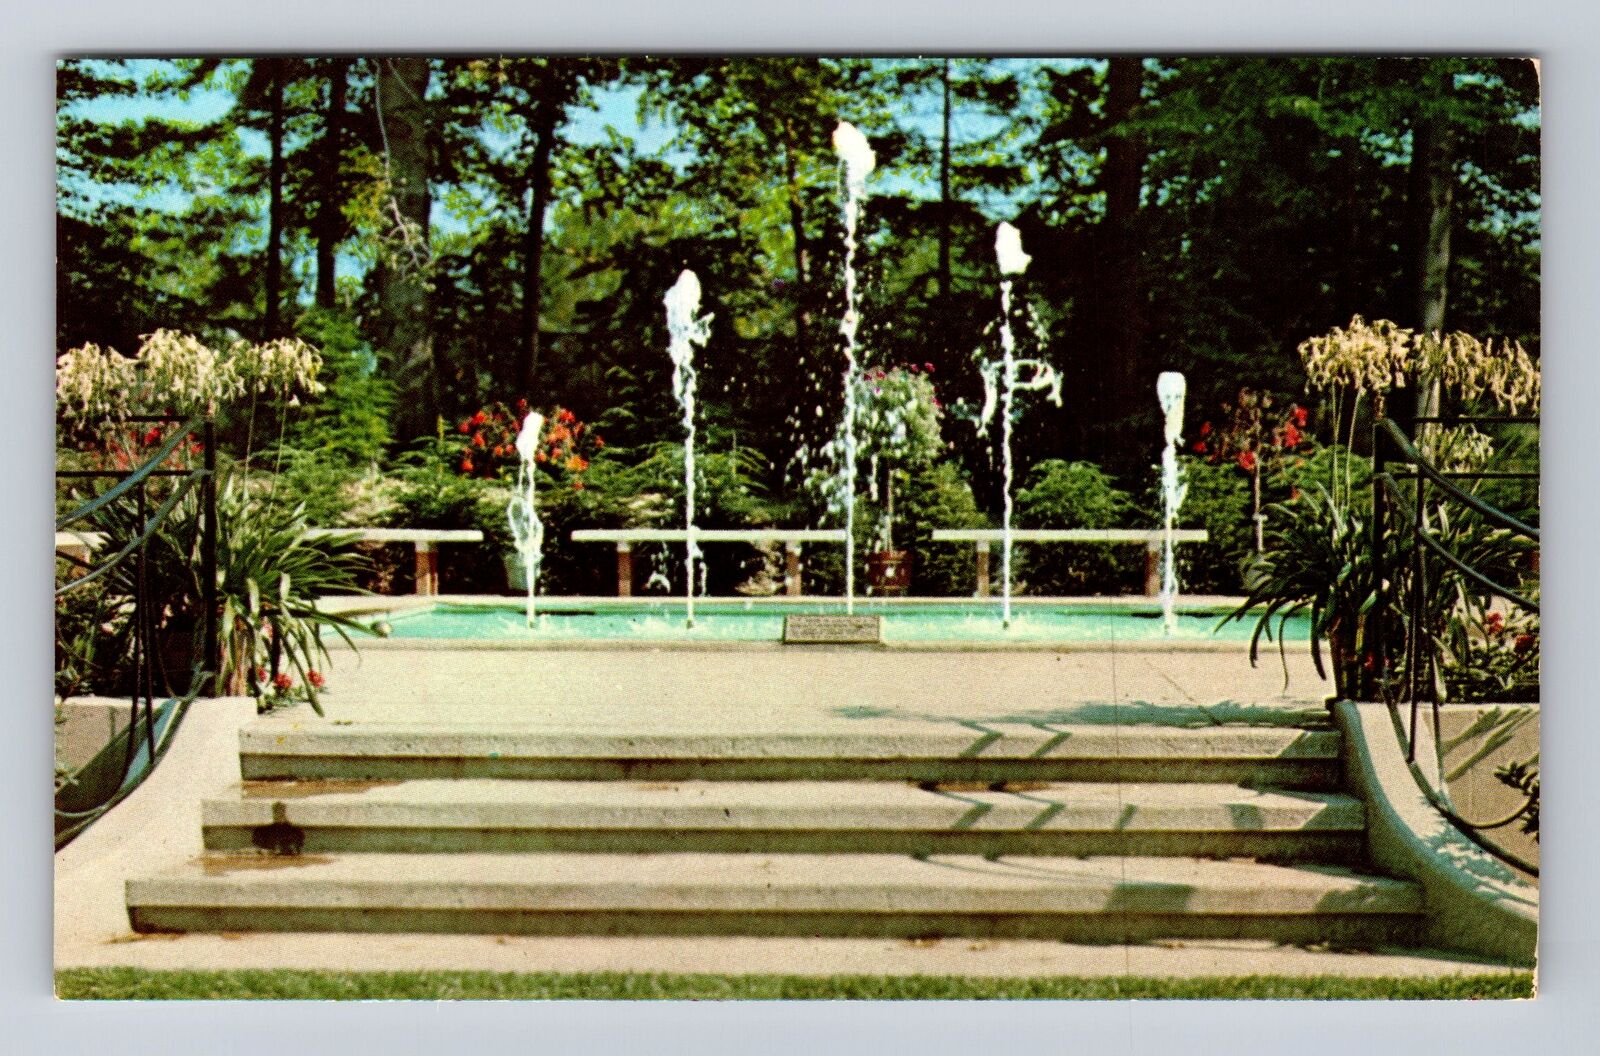 Mansfield OH-Ohio, Fountain & Gardens At Kingwood Center, Vintage Postcard